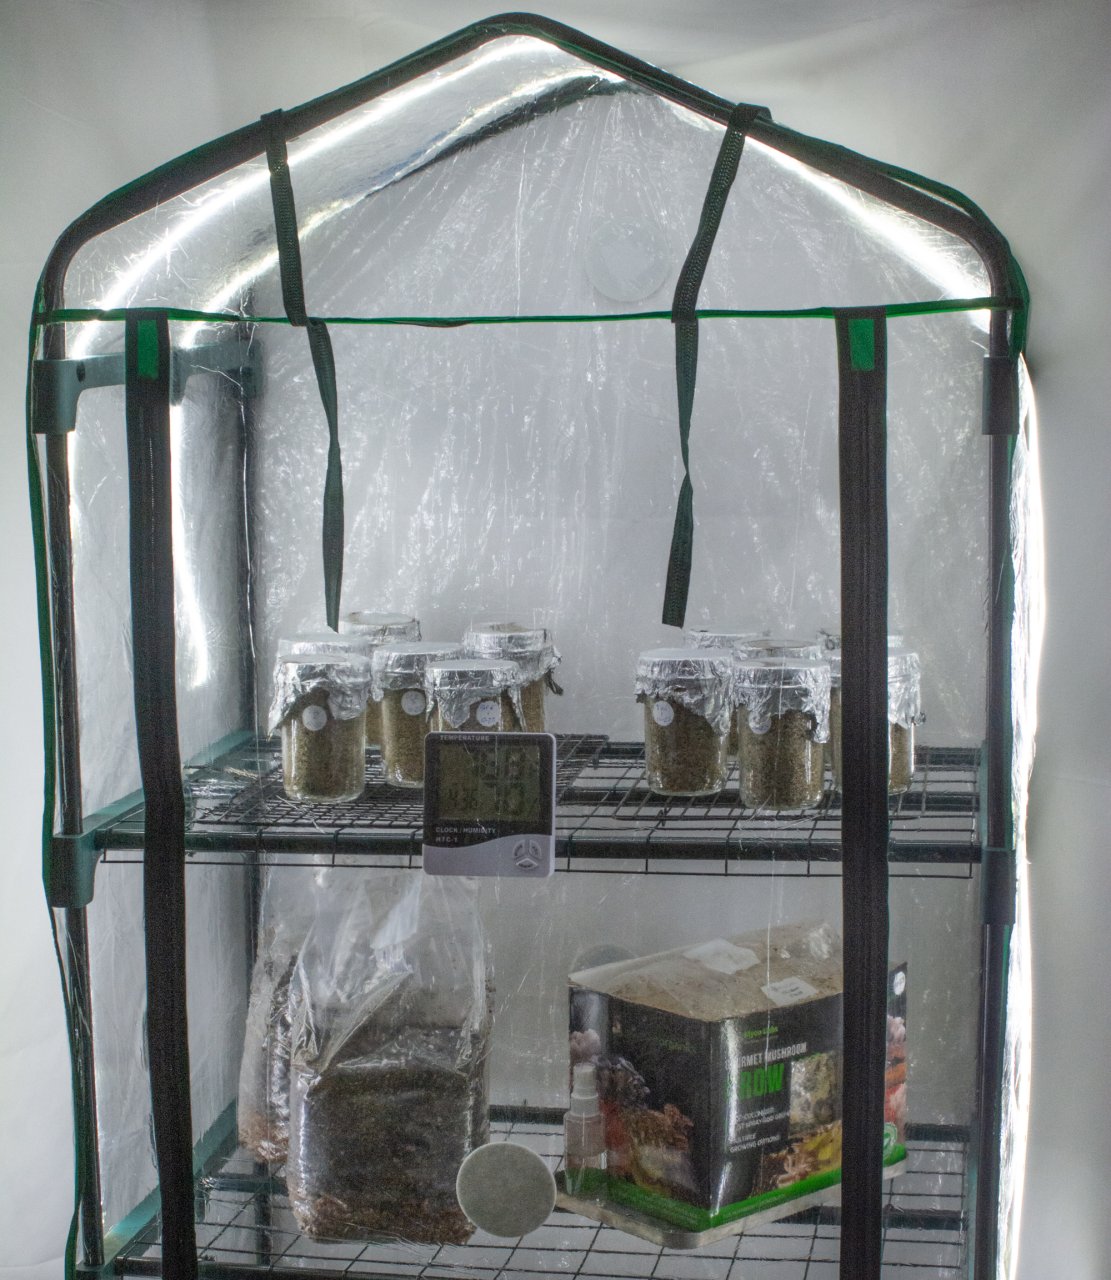 Midwest Grow Kit COB strip temporary placement.jpg